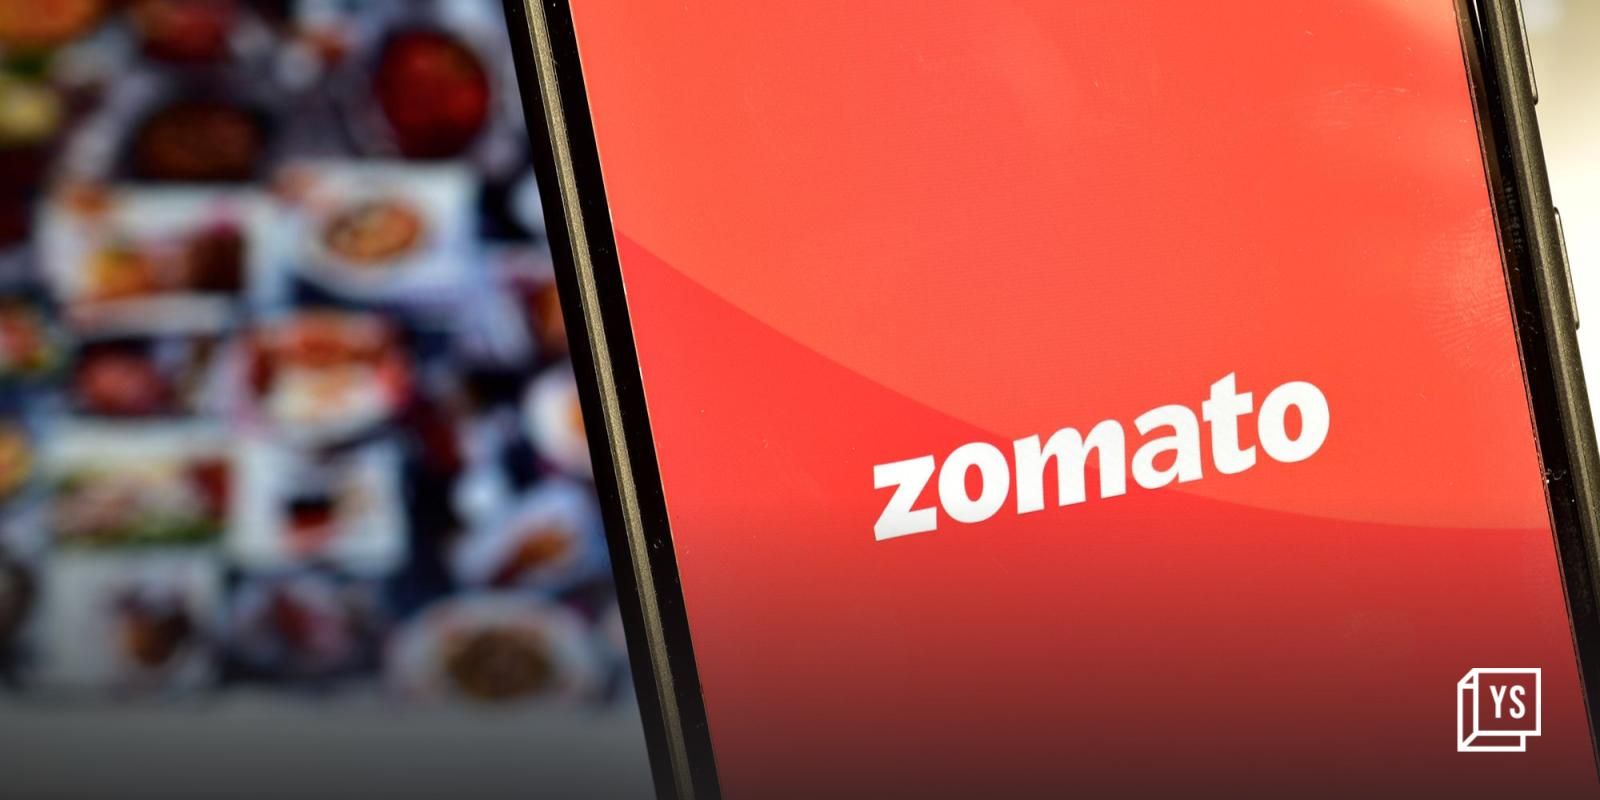 Zomato is now the most valuable company to emerge out of Indian startup ecosystem